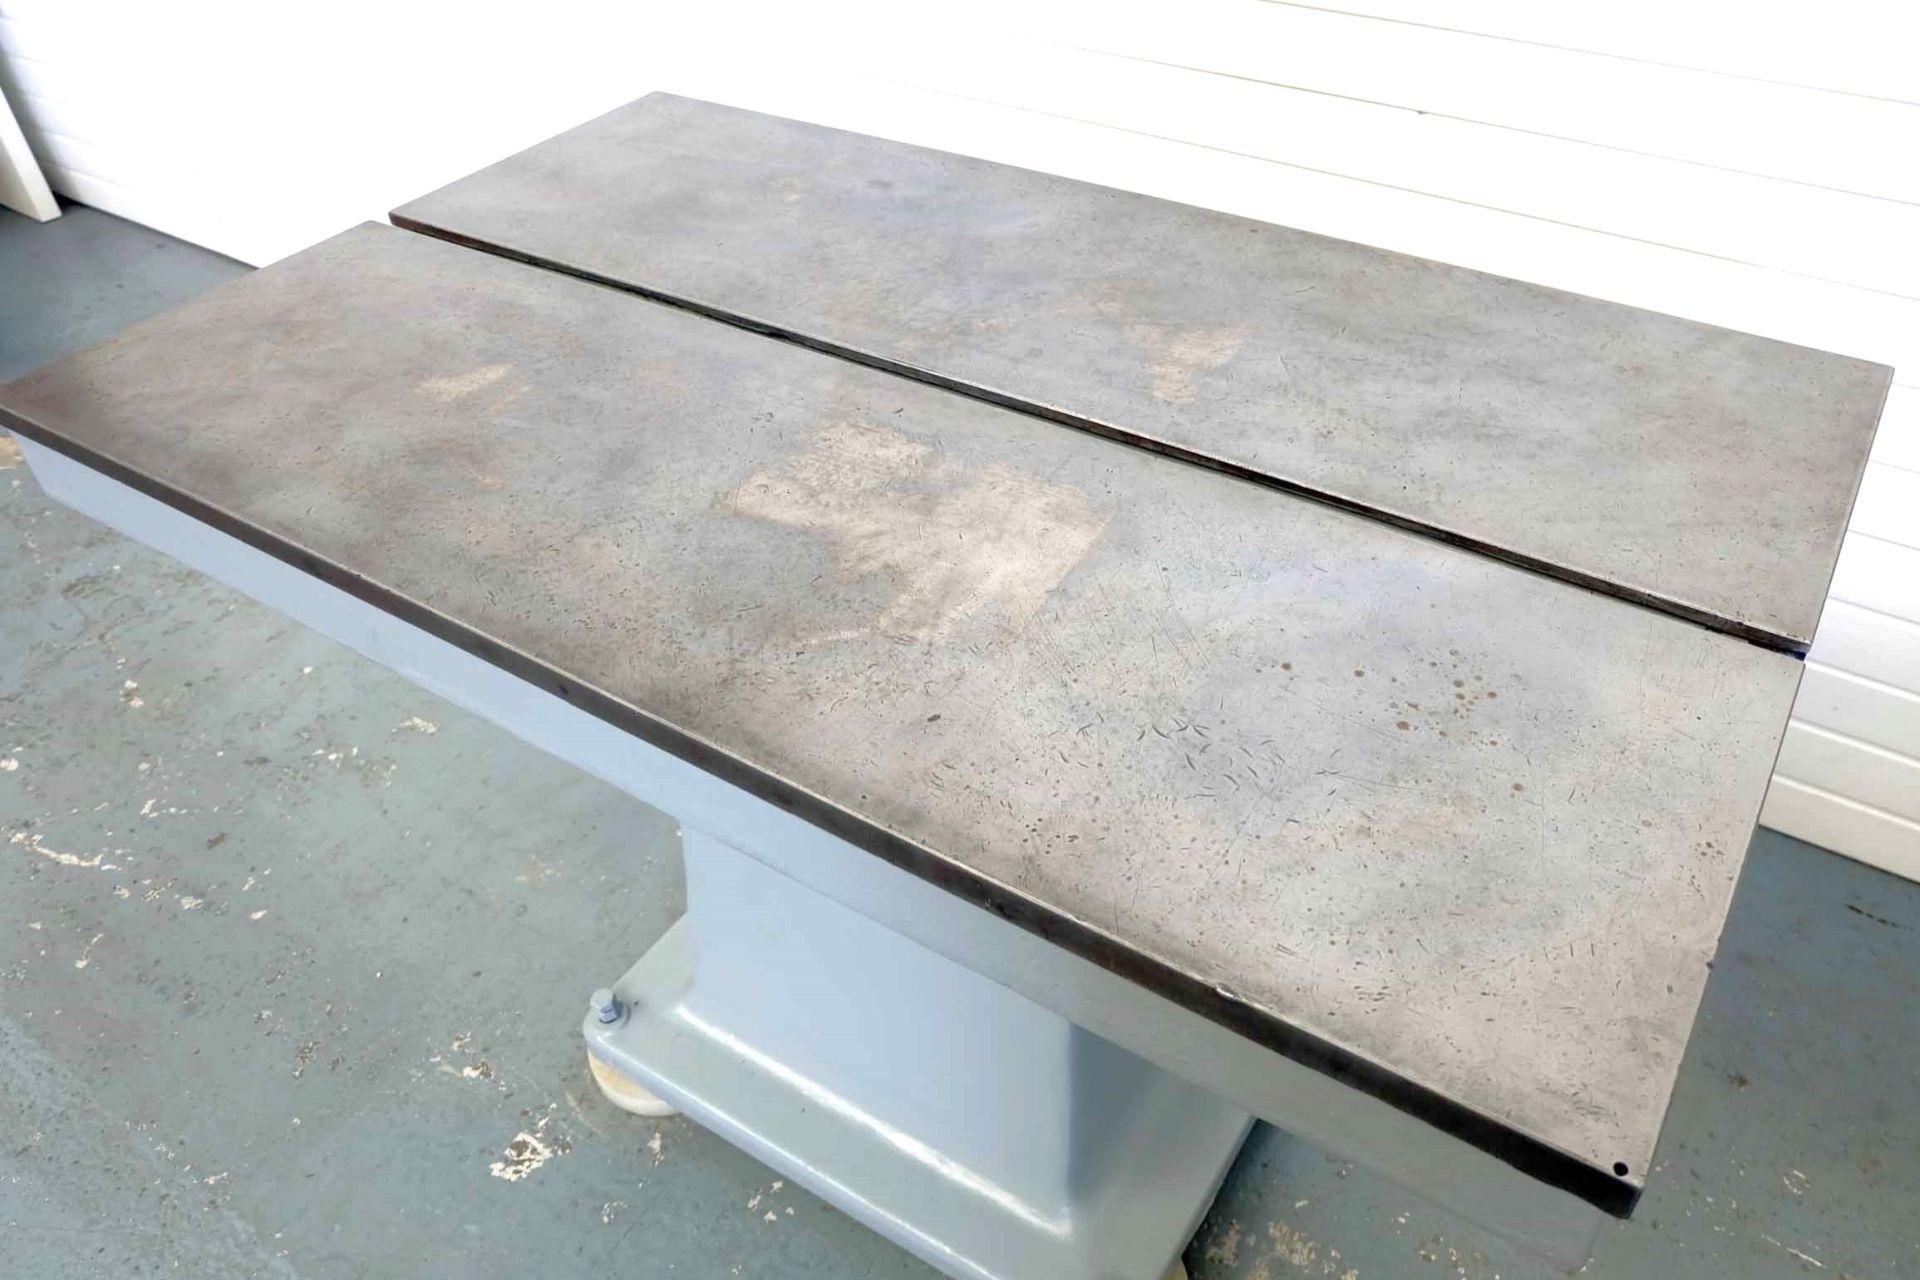 Cast Iron Surface Table With Tee Slot . Size: 54" x 32". Surface Height: 34". - Image 4 of 6